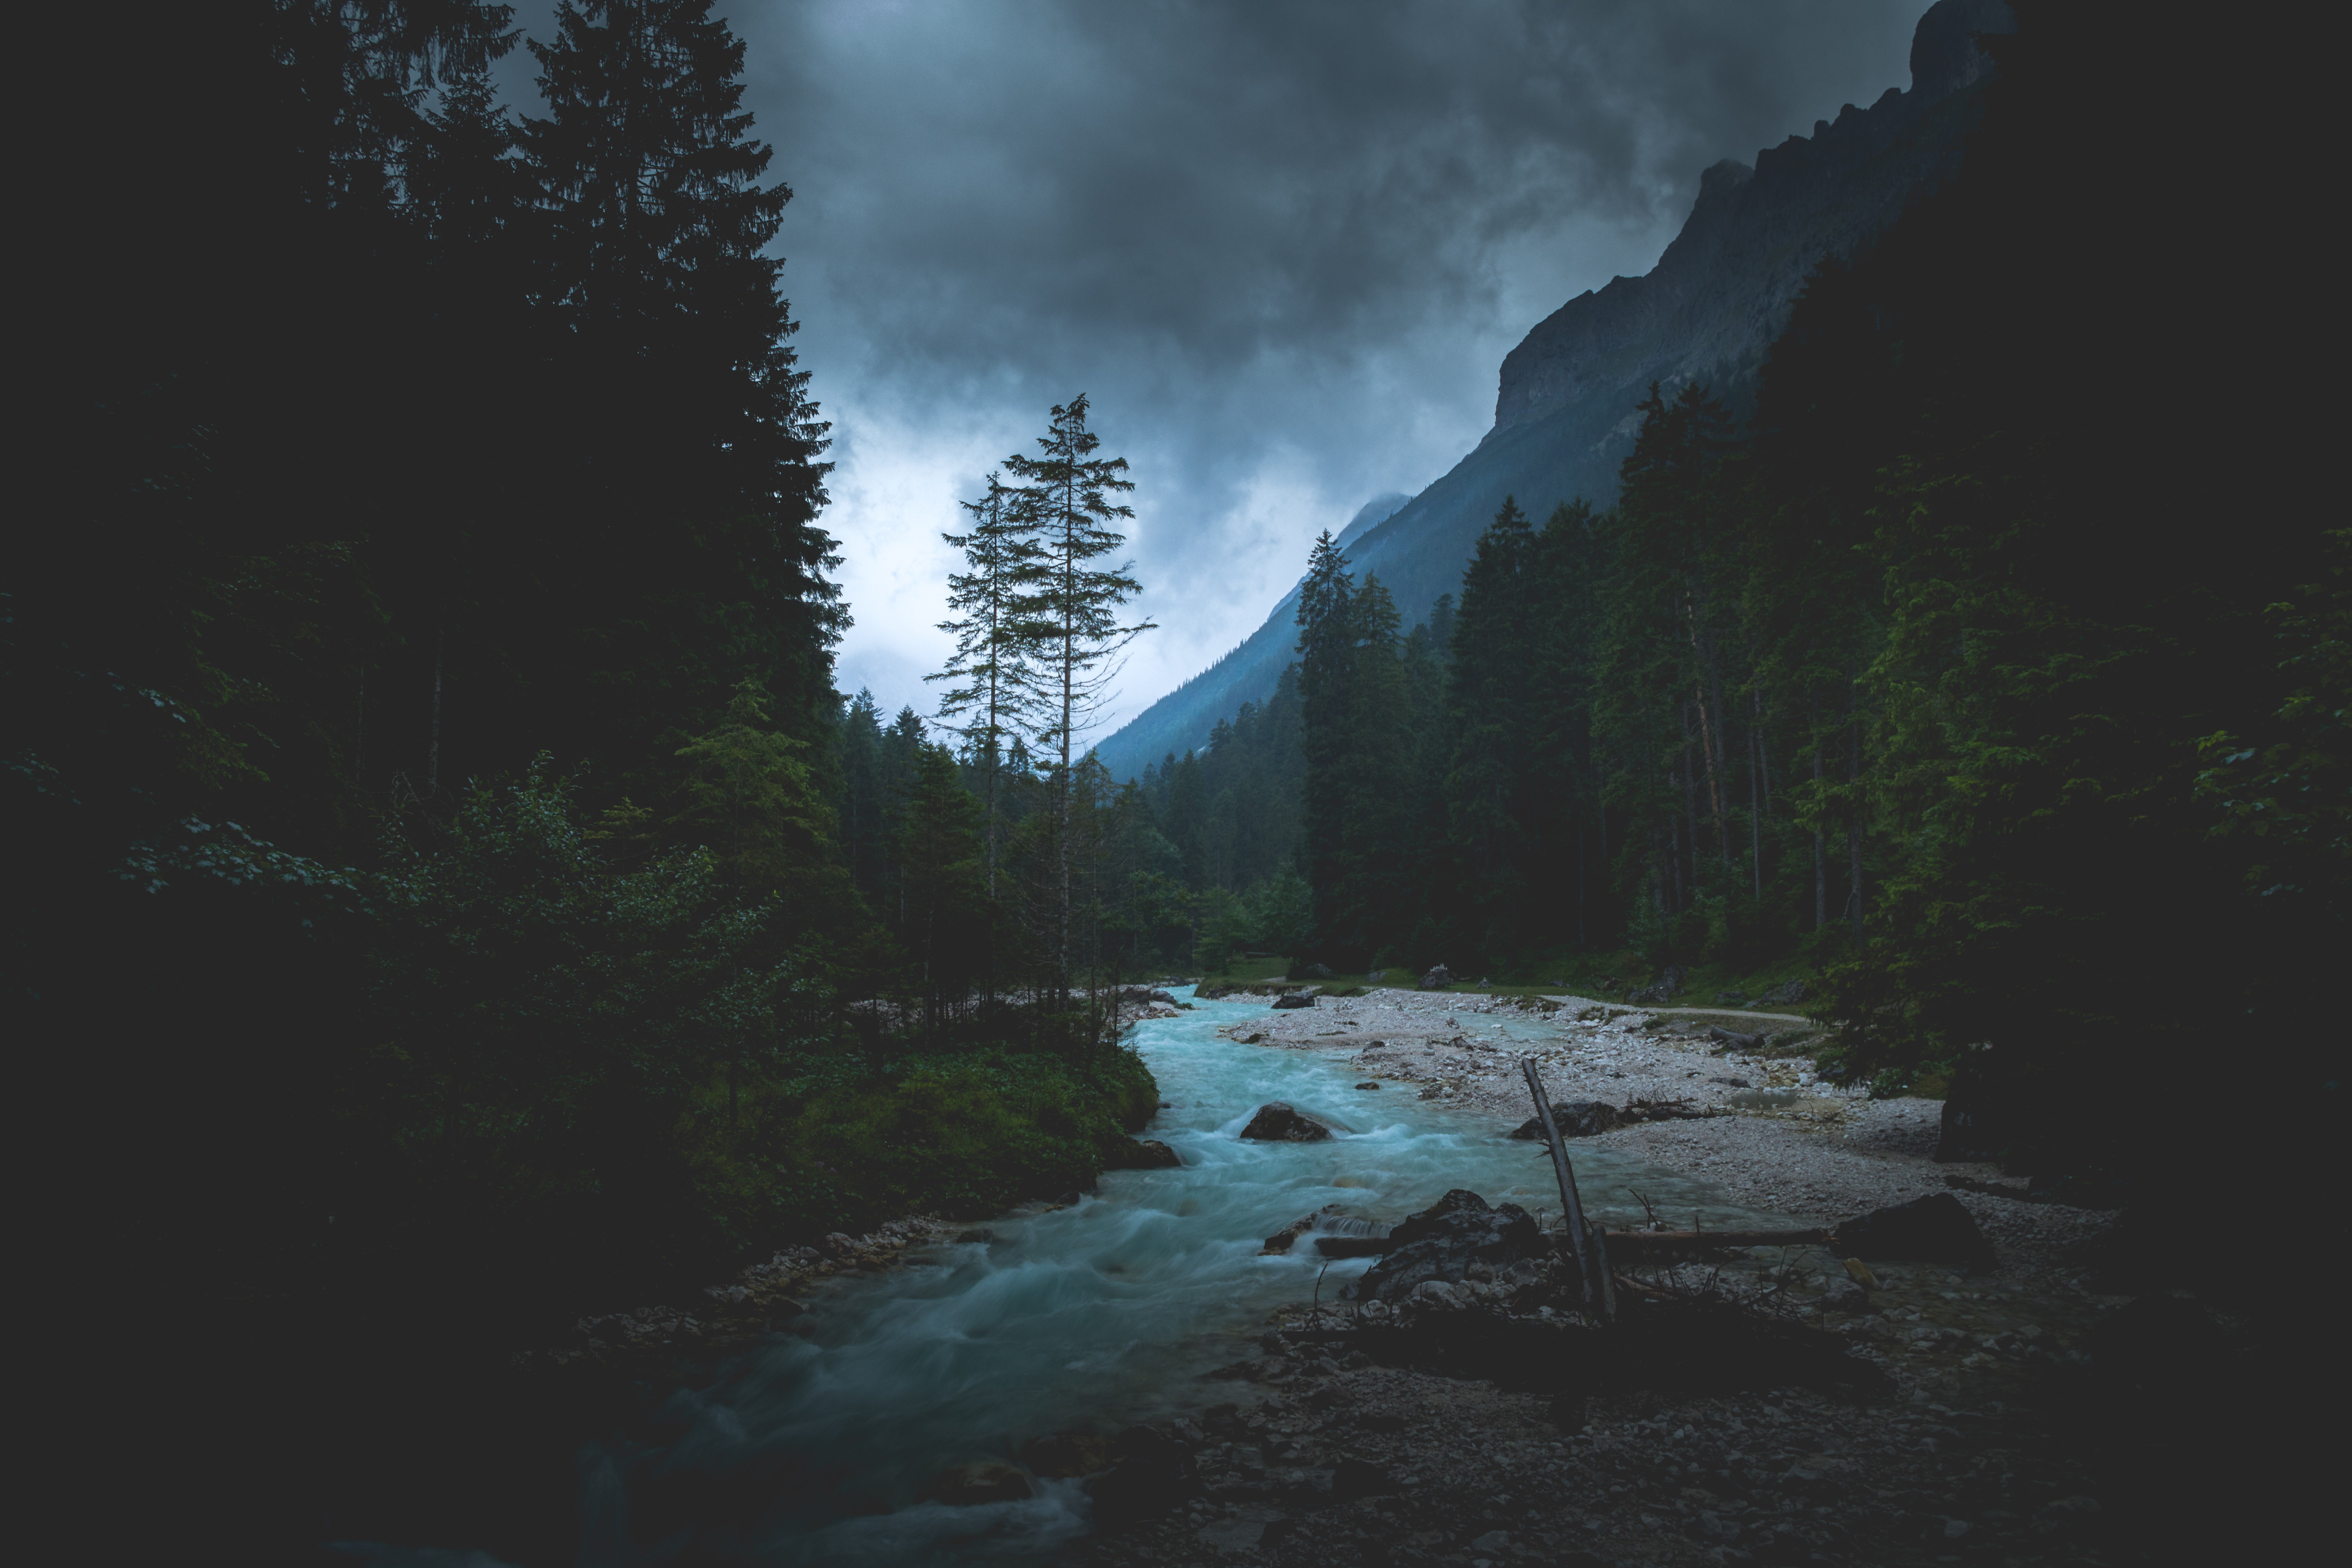 General 5472x3648 landscape forest overcast dark river nature mountains water